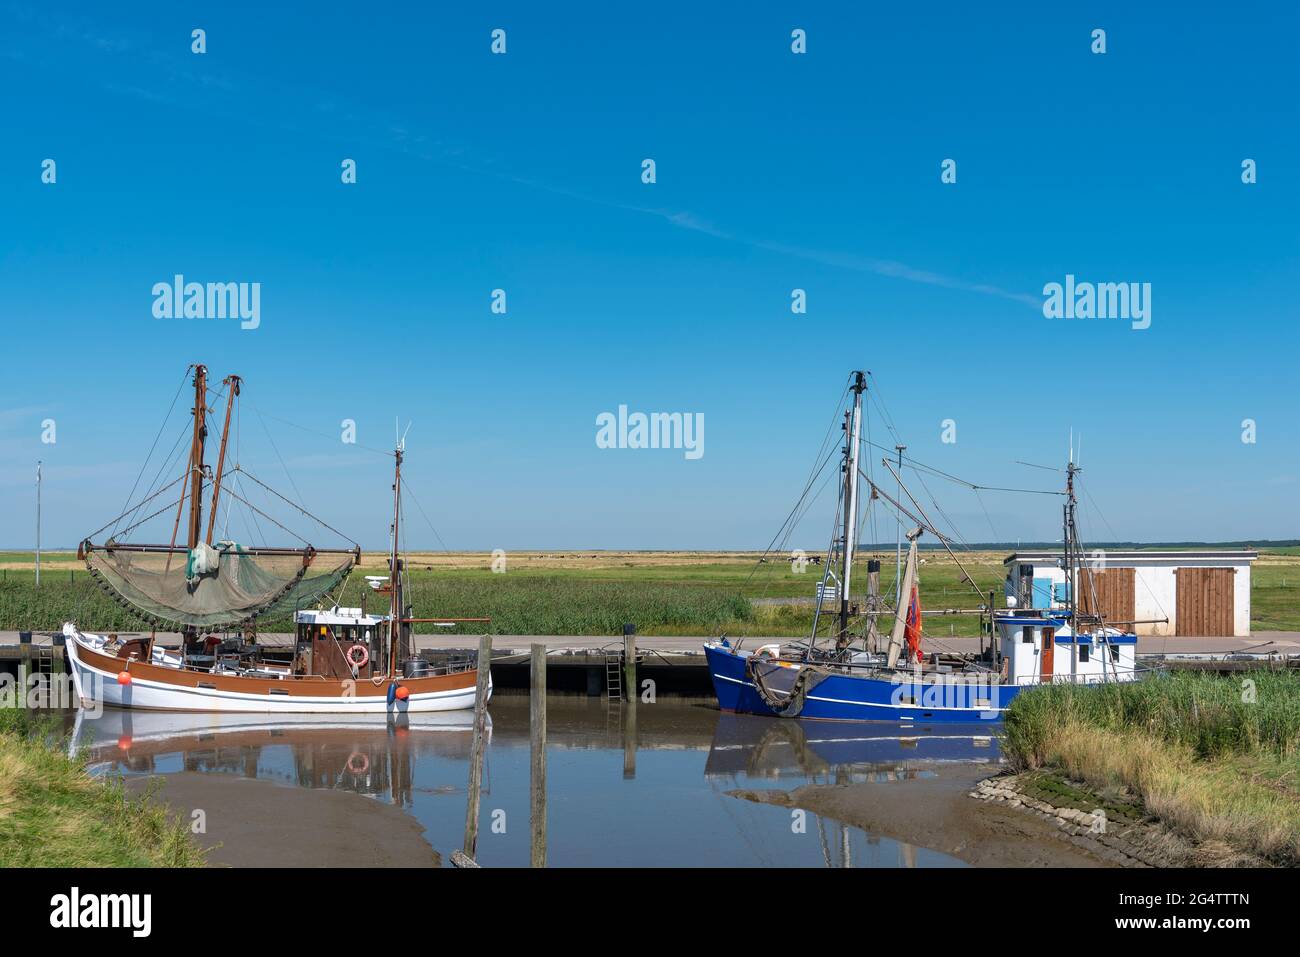 Shrimp cutter in the natural harbour, Spieka, Lower Saxony, Germany, Europe Stock Photo